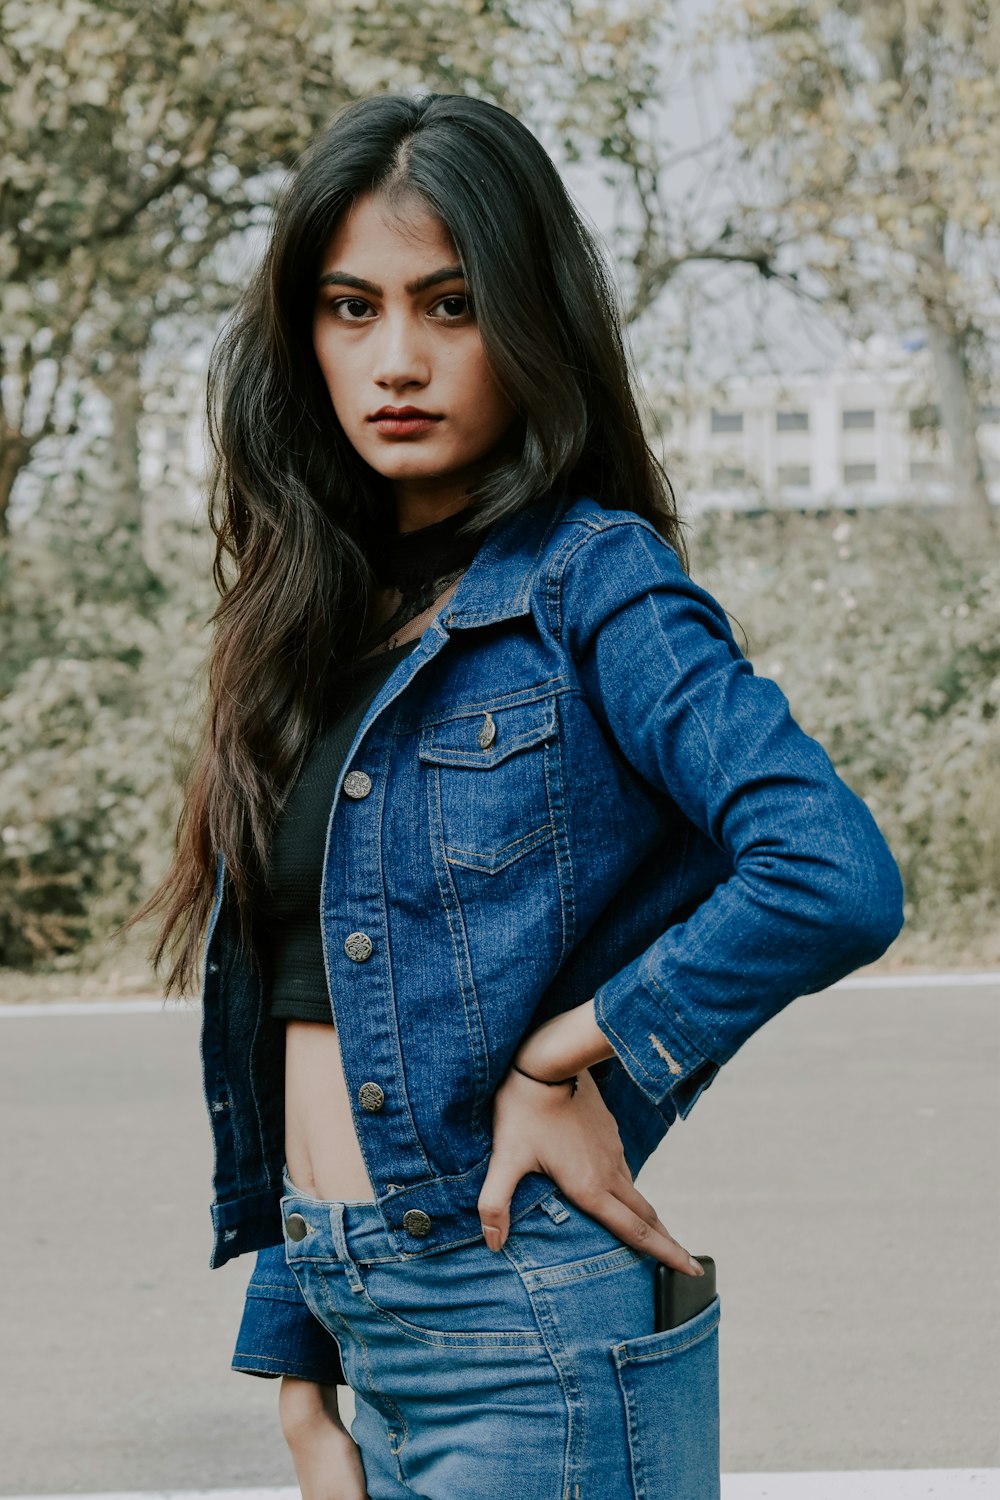 Woman in blue denim jacket standing on road during daytime photo – Free  Apparel Image on Unsplash